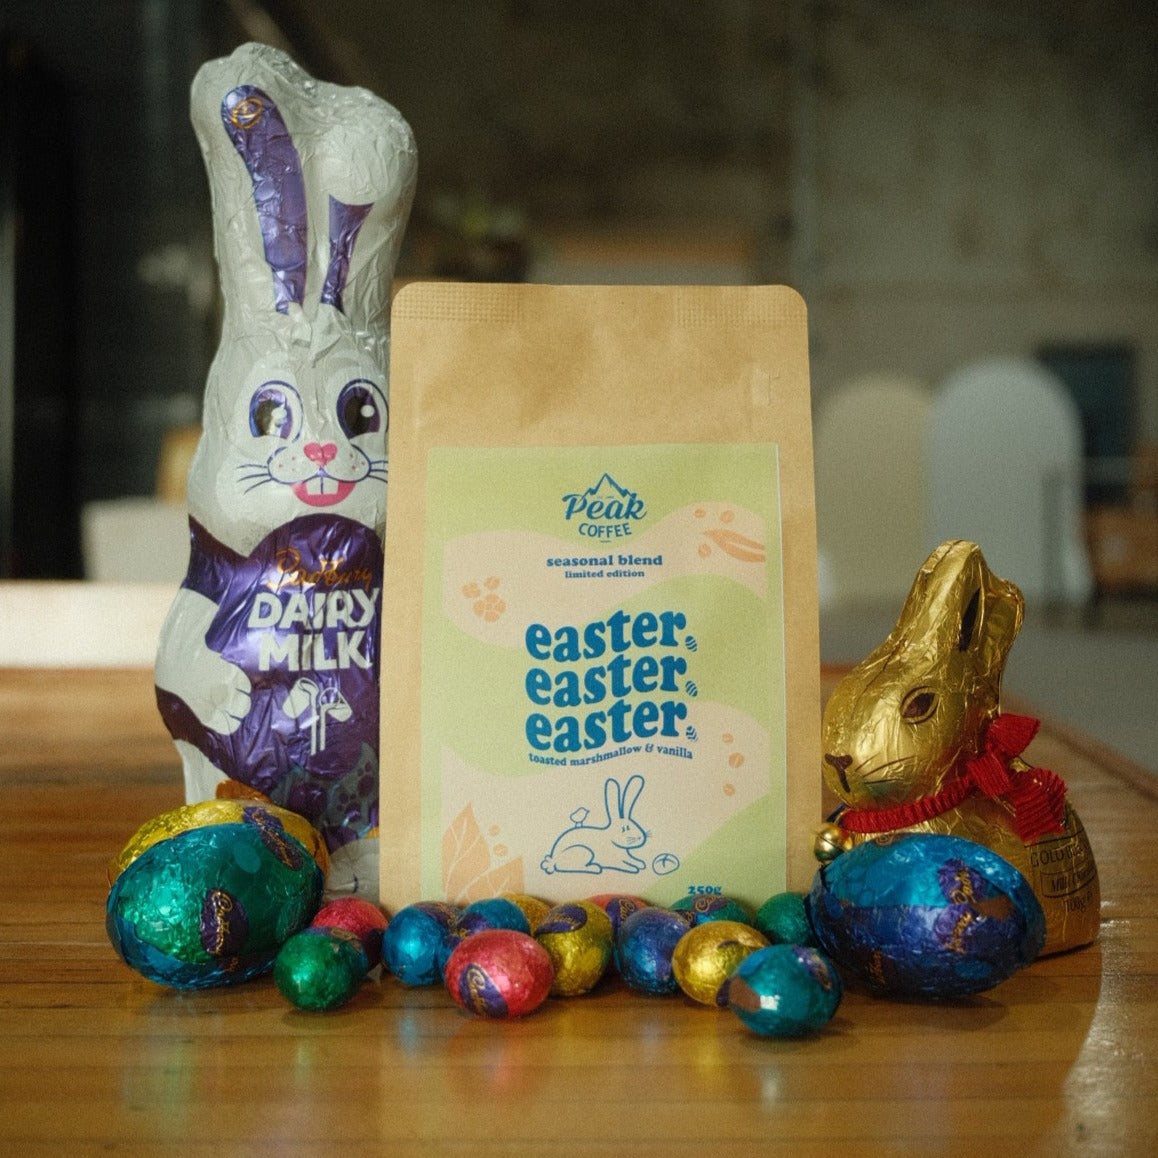 Peak Coffee easter blend, Surrounded by chocolates